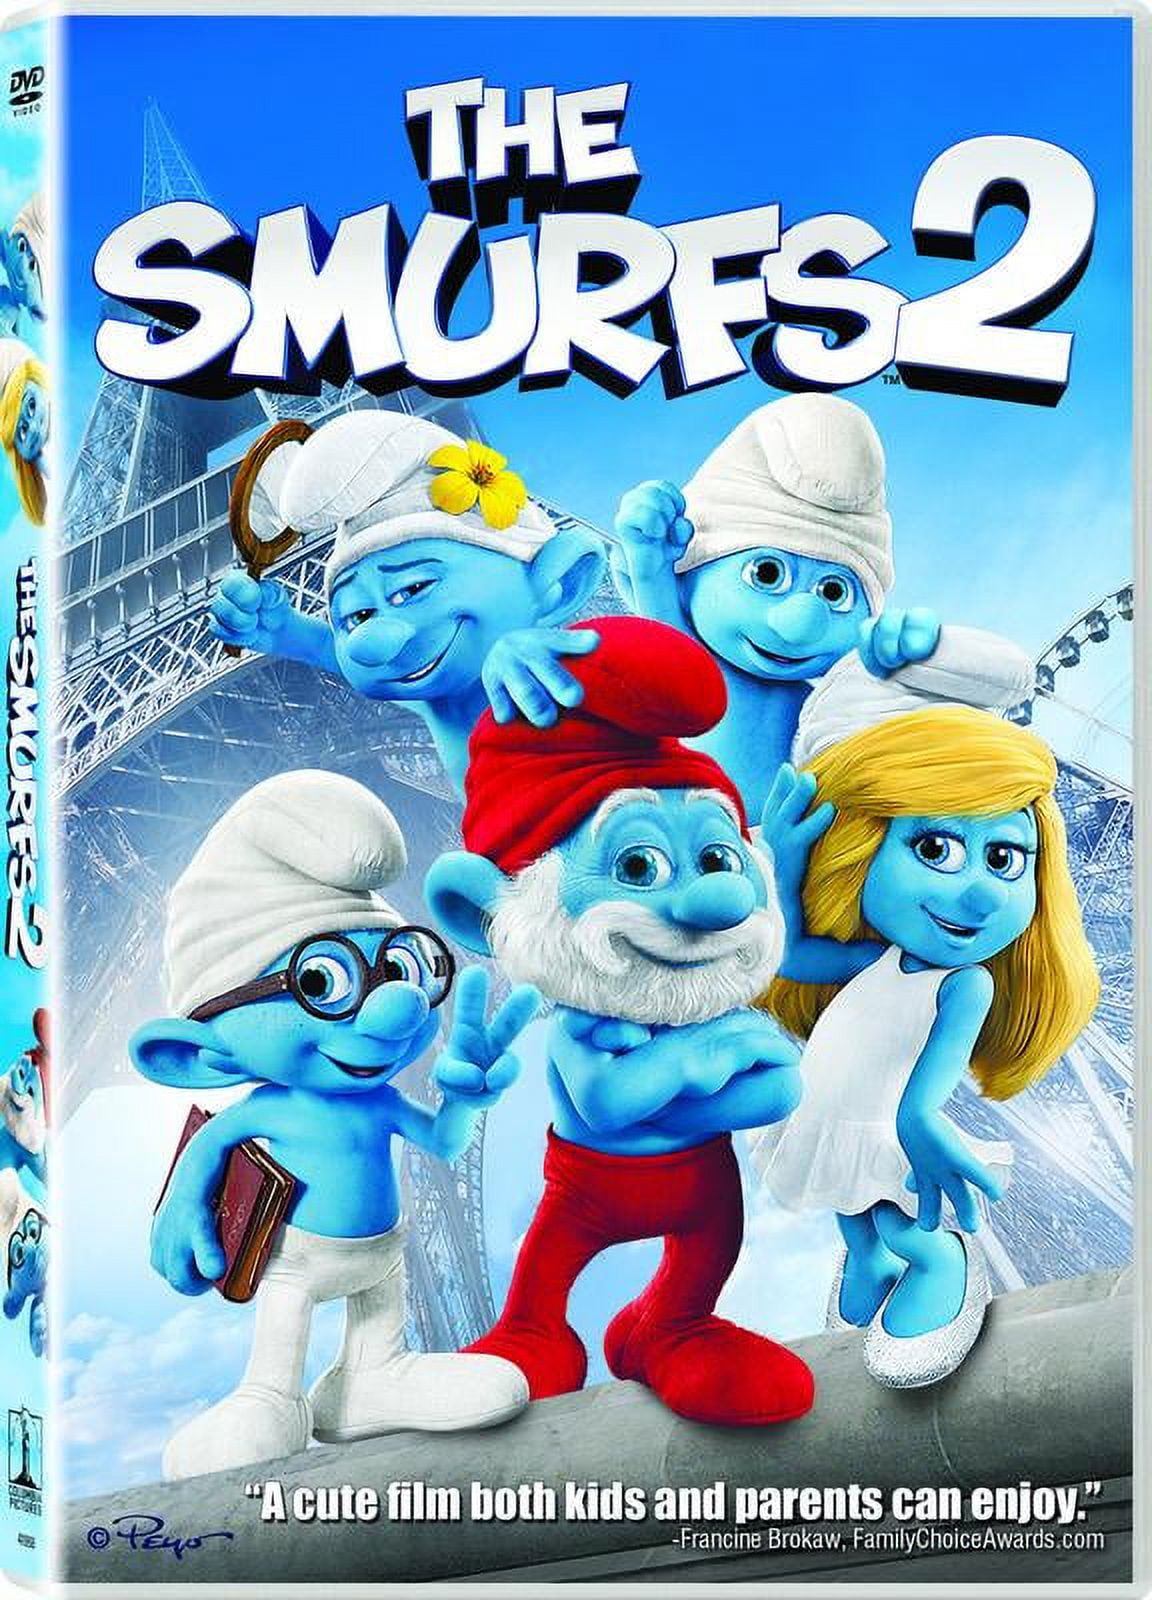 BEST GAME: Smurf's Village, Create your own MAGICAL world and protect the  cute SMURFS from evil Gargamel!, By The Smurfs' Village